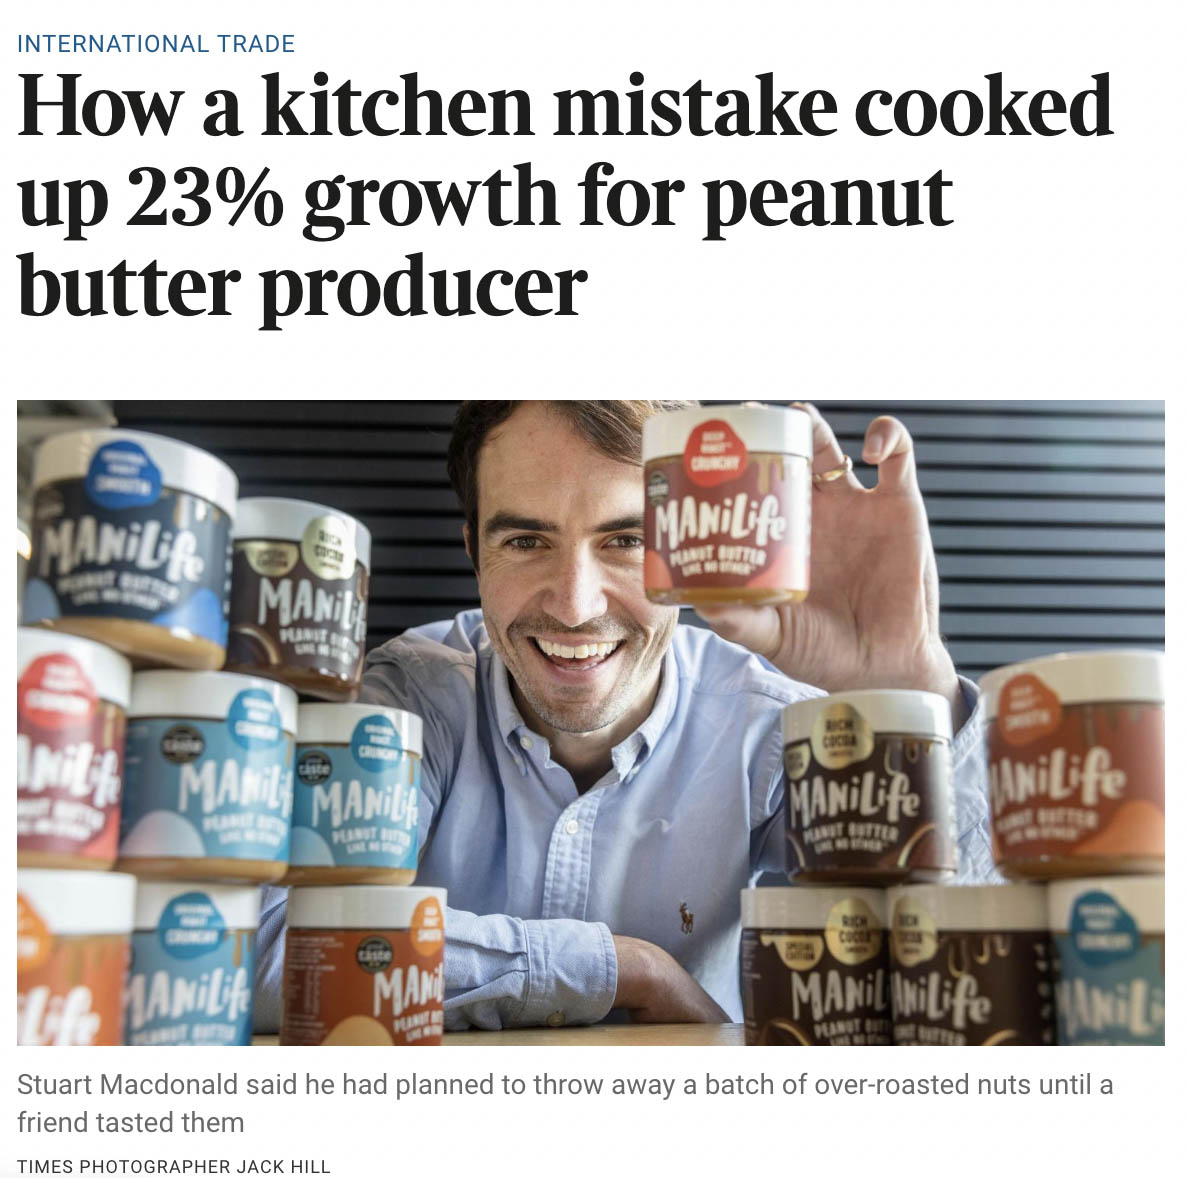 news article about peanut butter producer